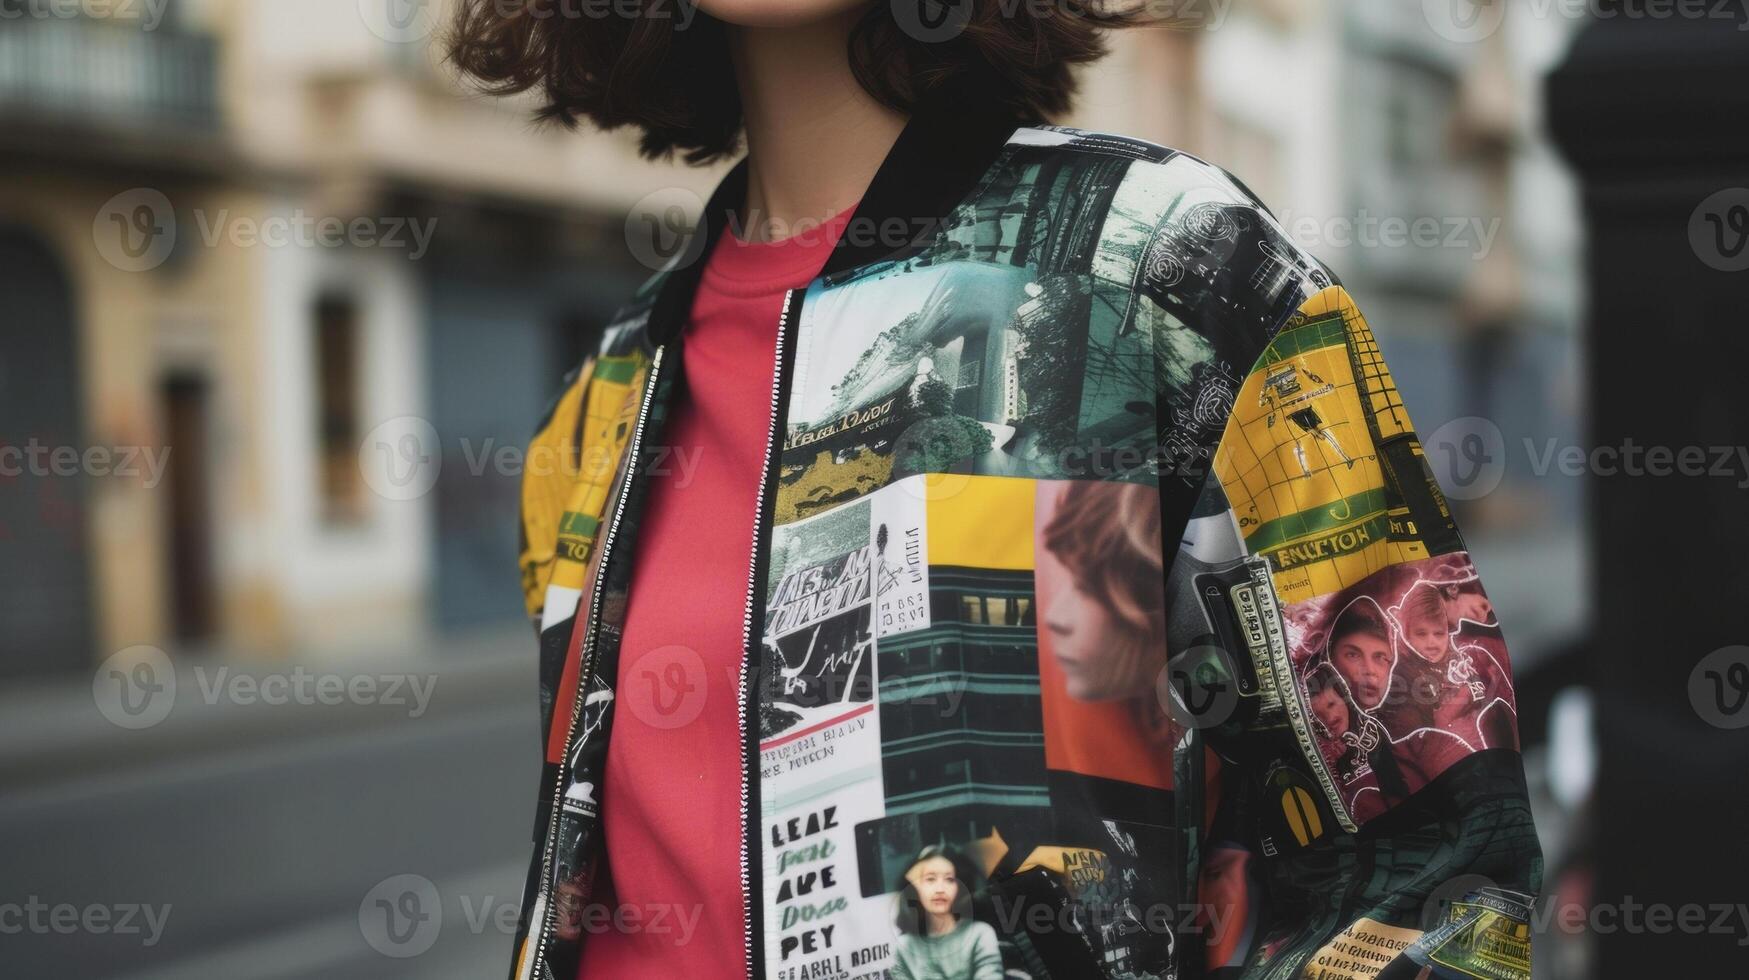 A 3D printed bomber jacket with a personalized collage design featuring the wearers favorite memories. This nostalgic look is perfect for a day of exploring a vibrant eclecti photo